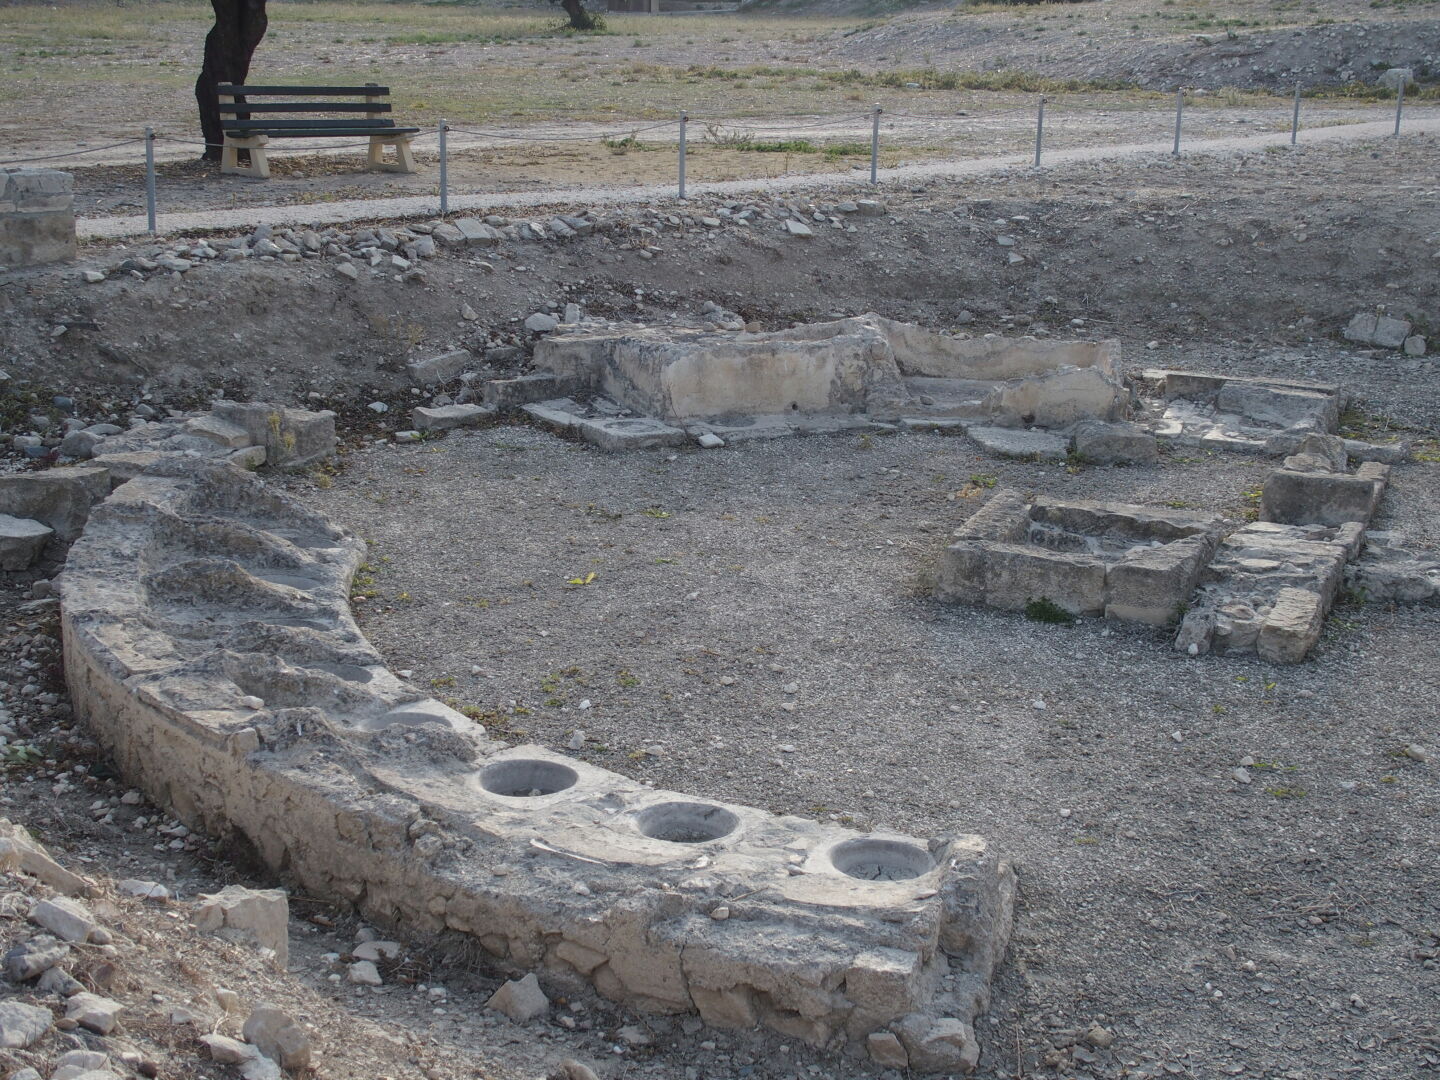 The latrines at the archaeologic site of Amathous, just a 15 minute walk from our hotel.